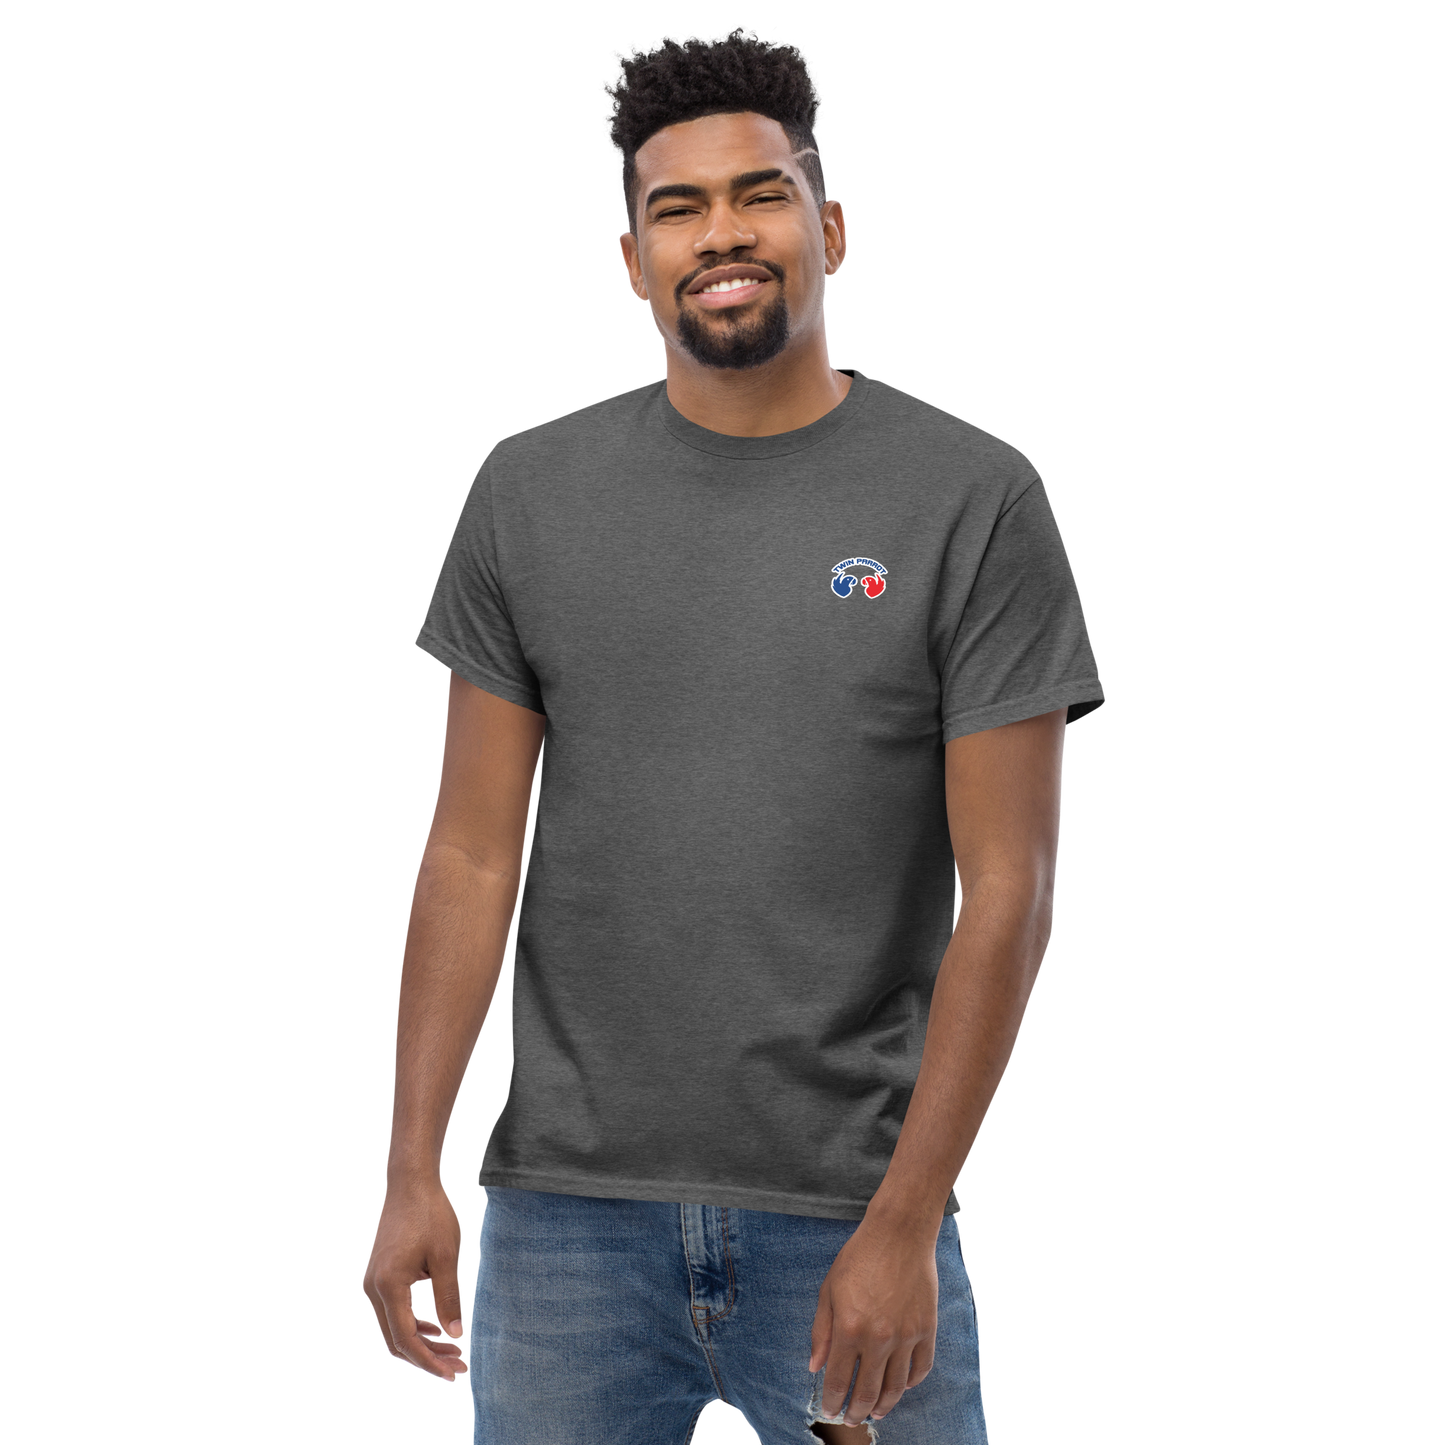 Level Up Your Streetwear: Men's Classic Tee (Structured Fit)